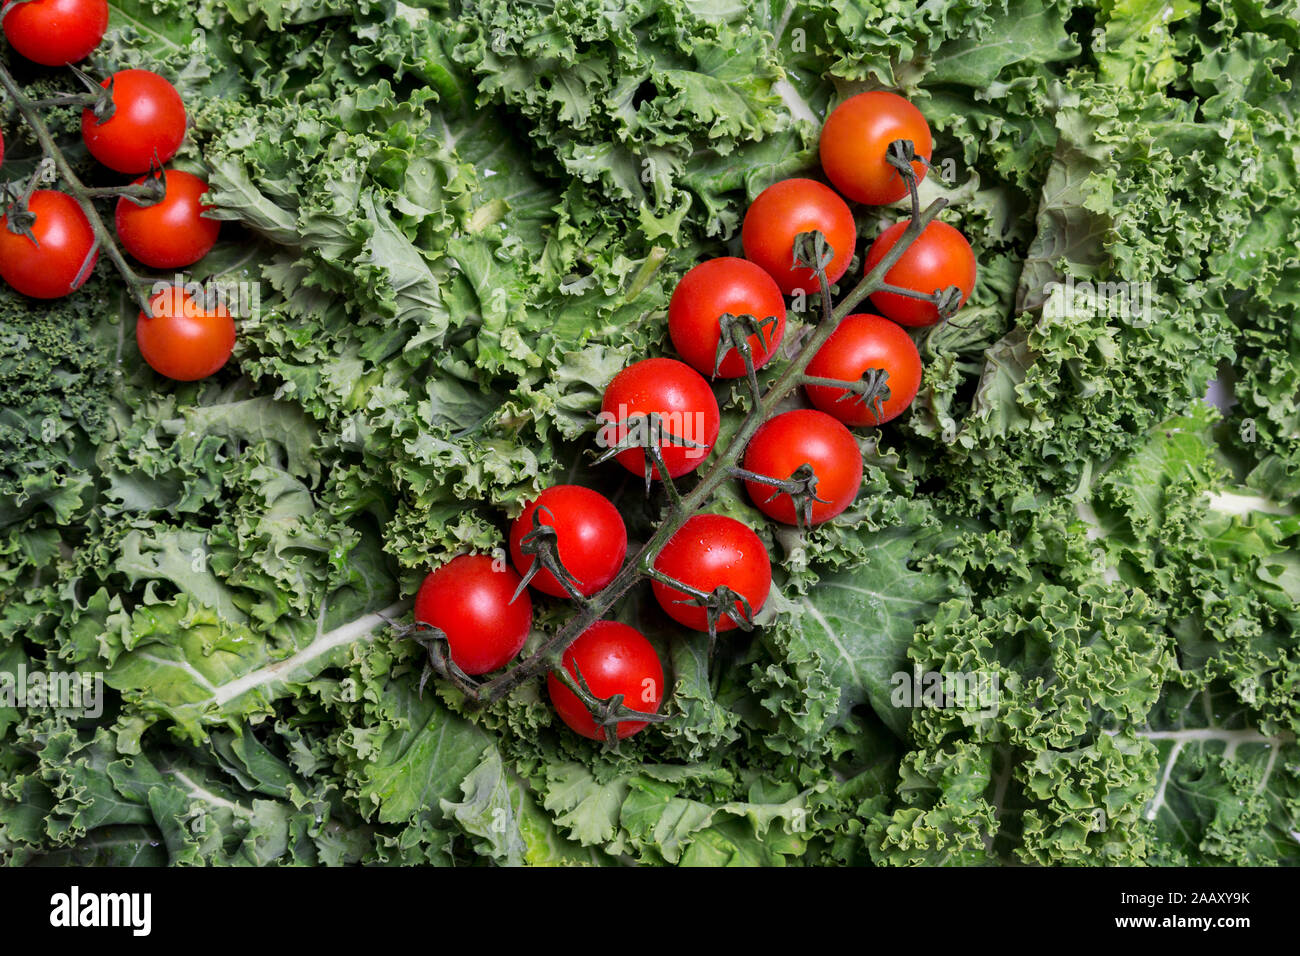 Tomatoes on green curly cabbage. Concept of healthy and diet food for lady Stock Photo